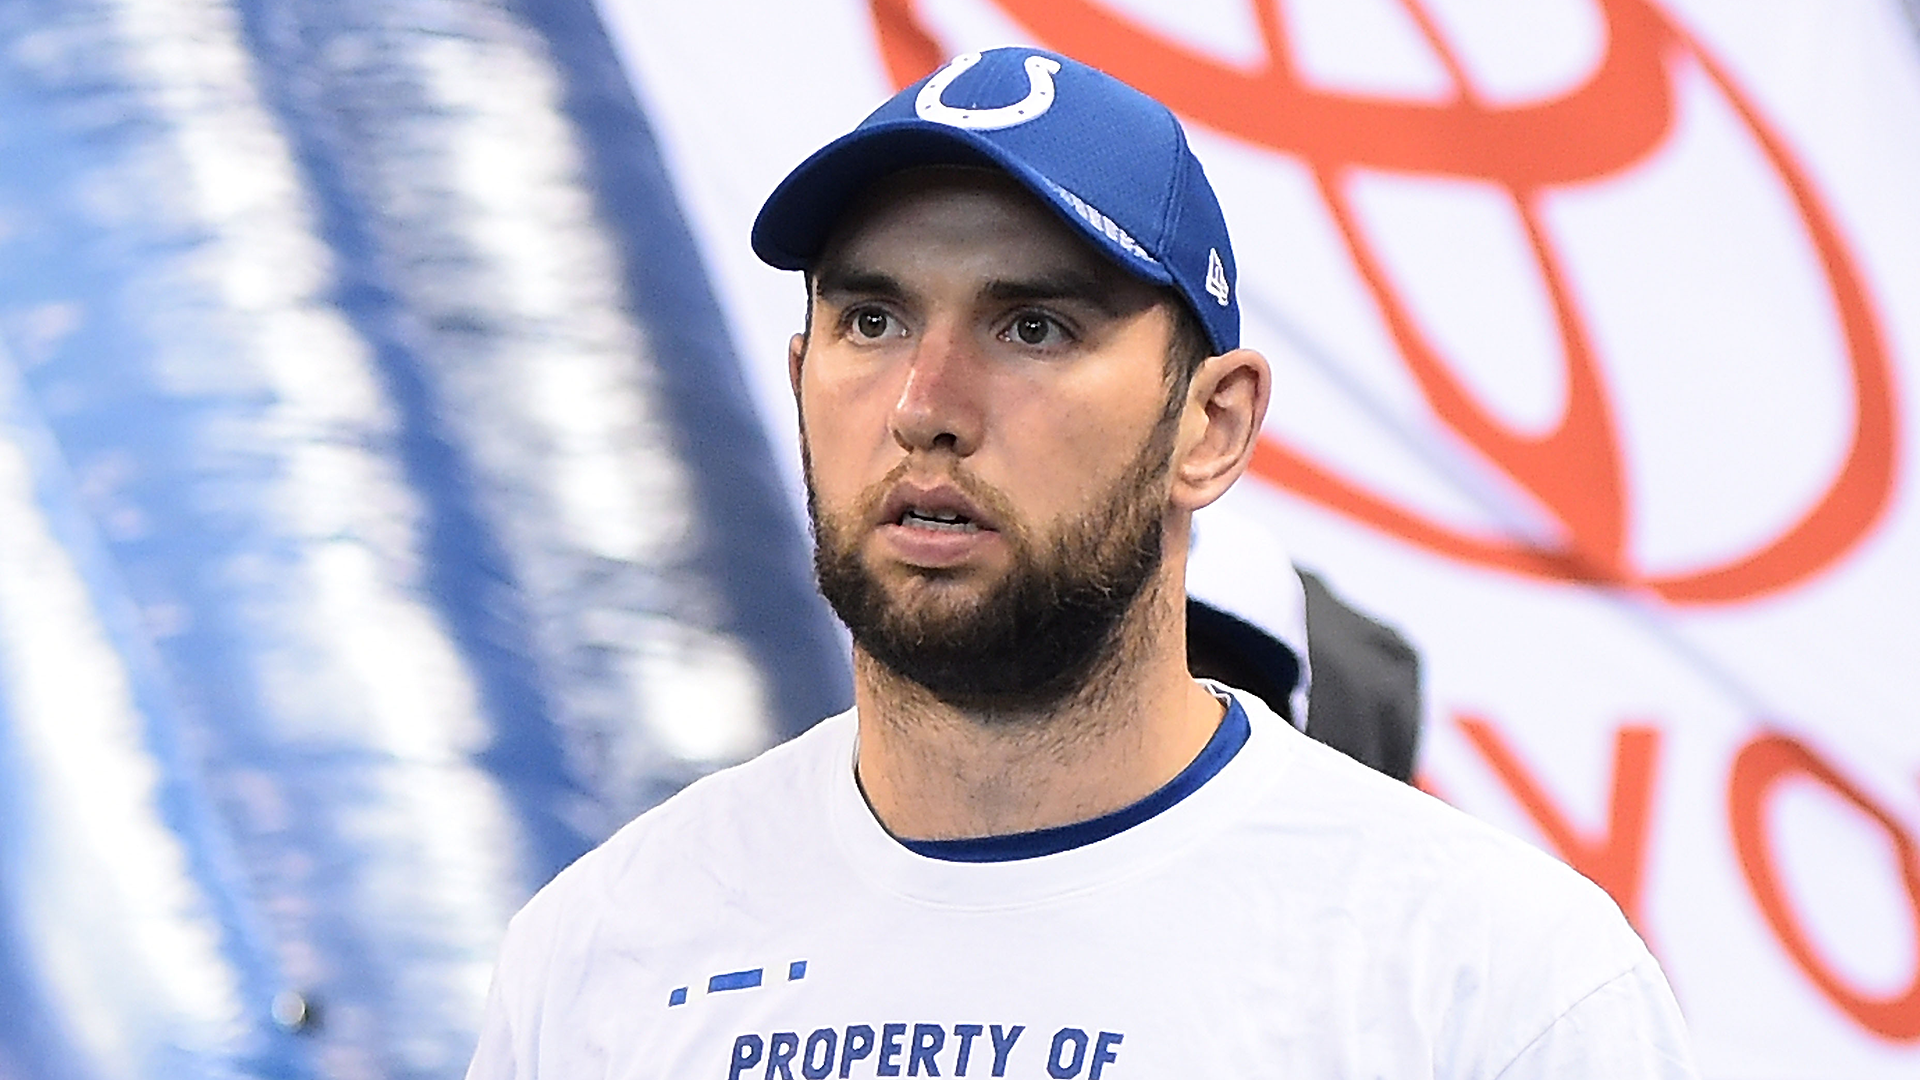 The Colts are still waiting on their Pro Bowl quarterback while the Lakers may have lost a player before the season even started.